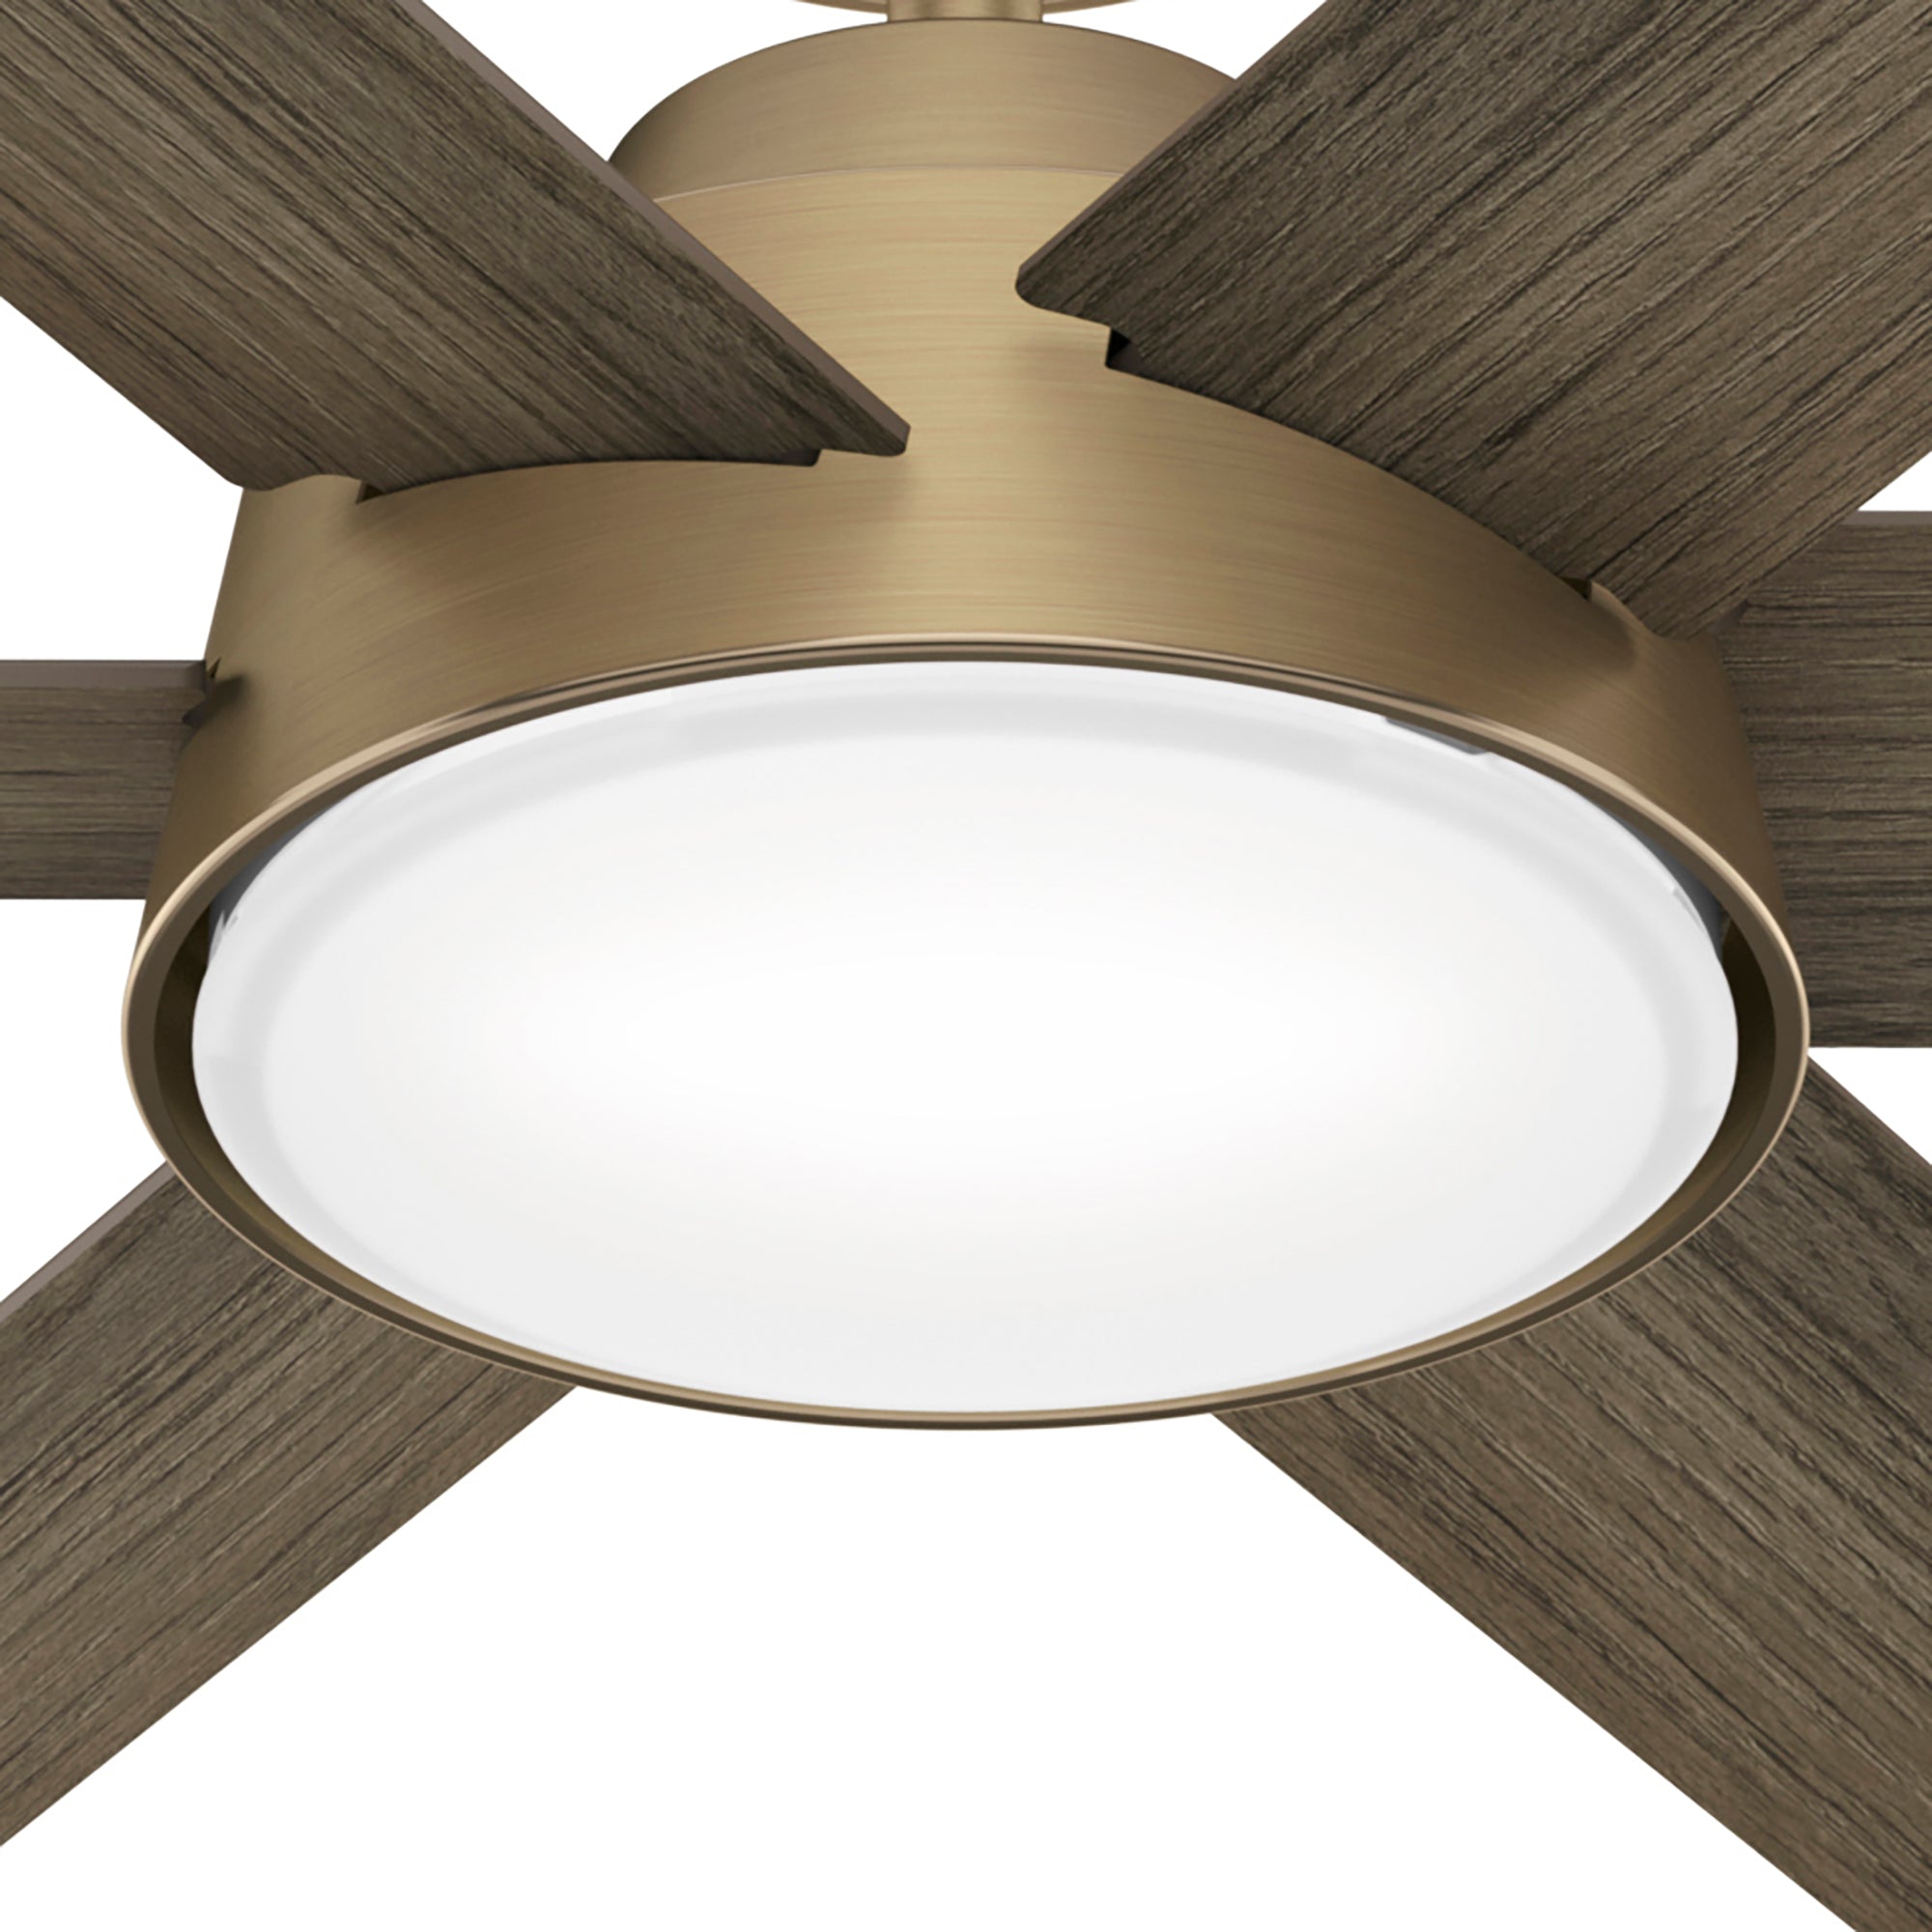 Hunter 52 inch Donatella Ceiling Fan with LED Light Kit and Handheld Remote Ceiling Fan Hunter Luxe Gold Warm Grey Oak / Painted Cased White